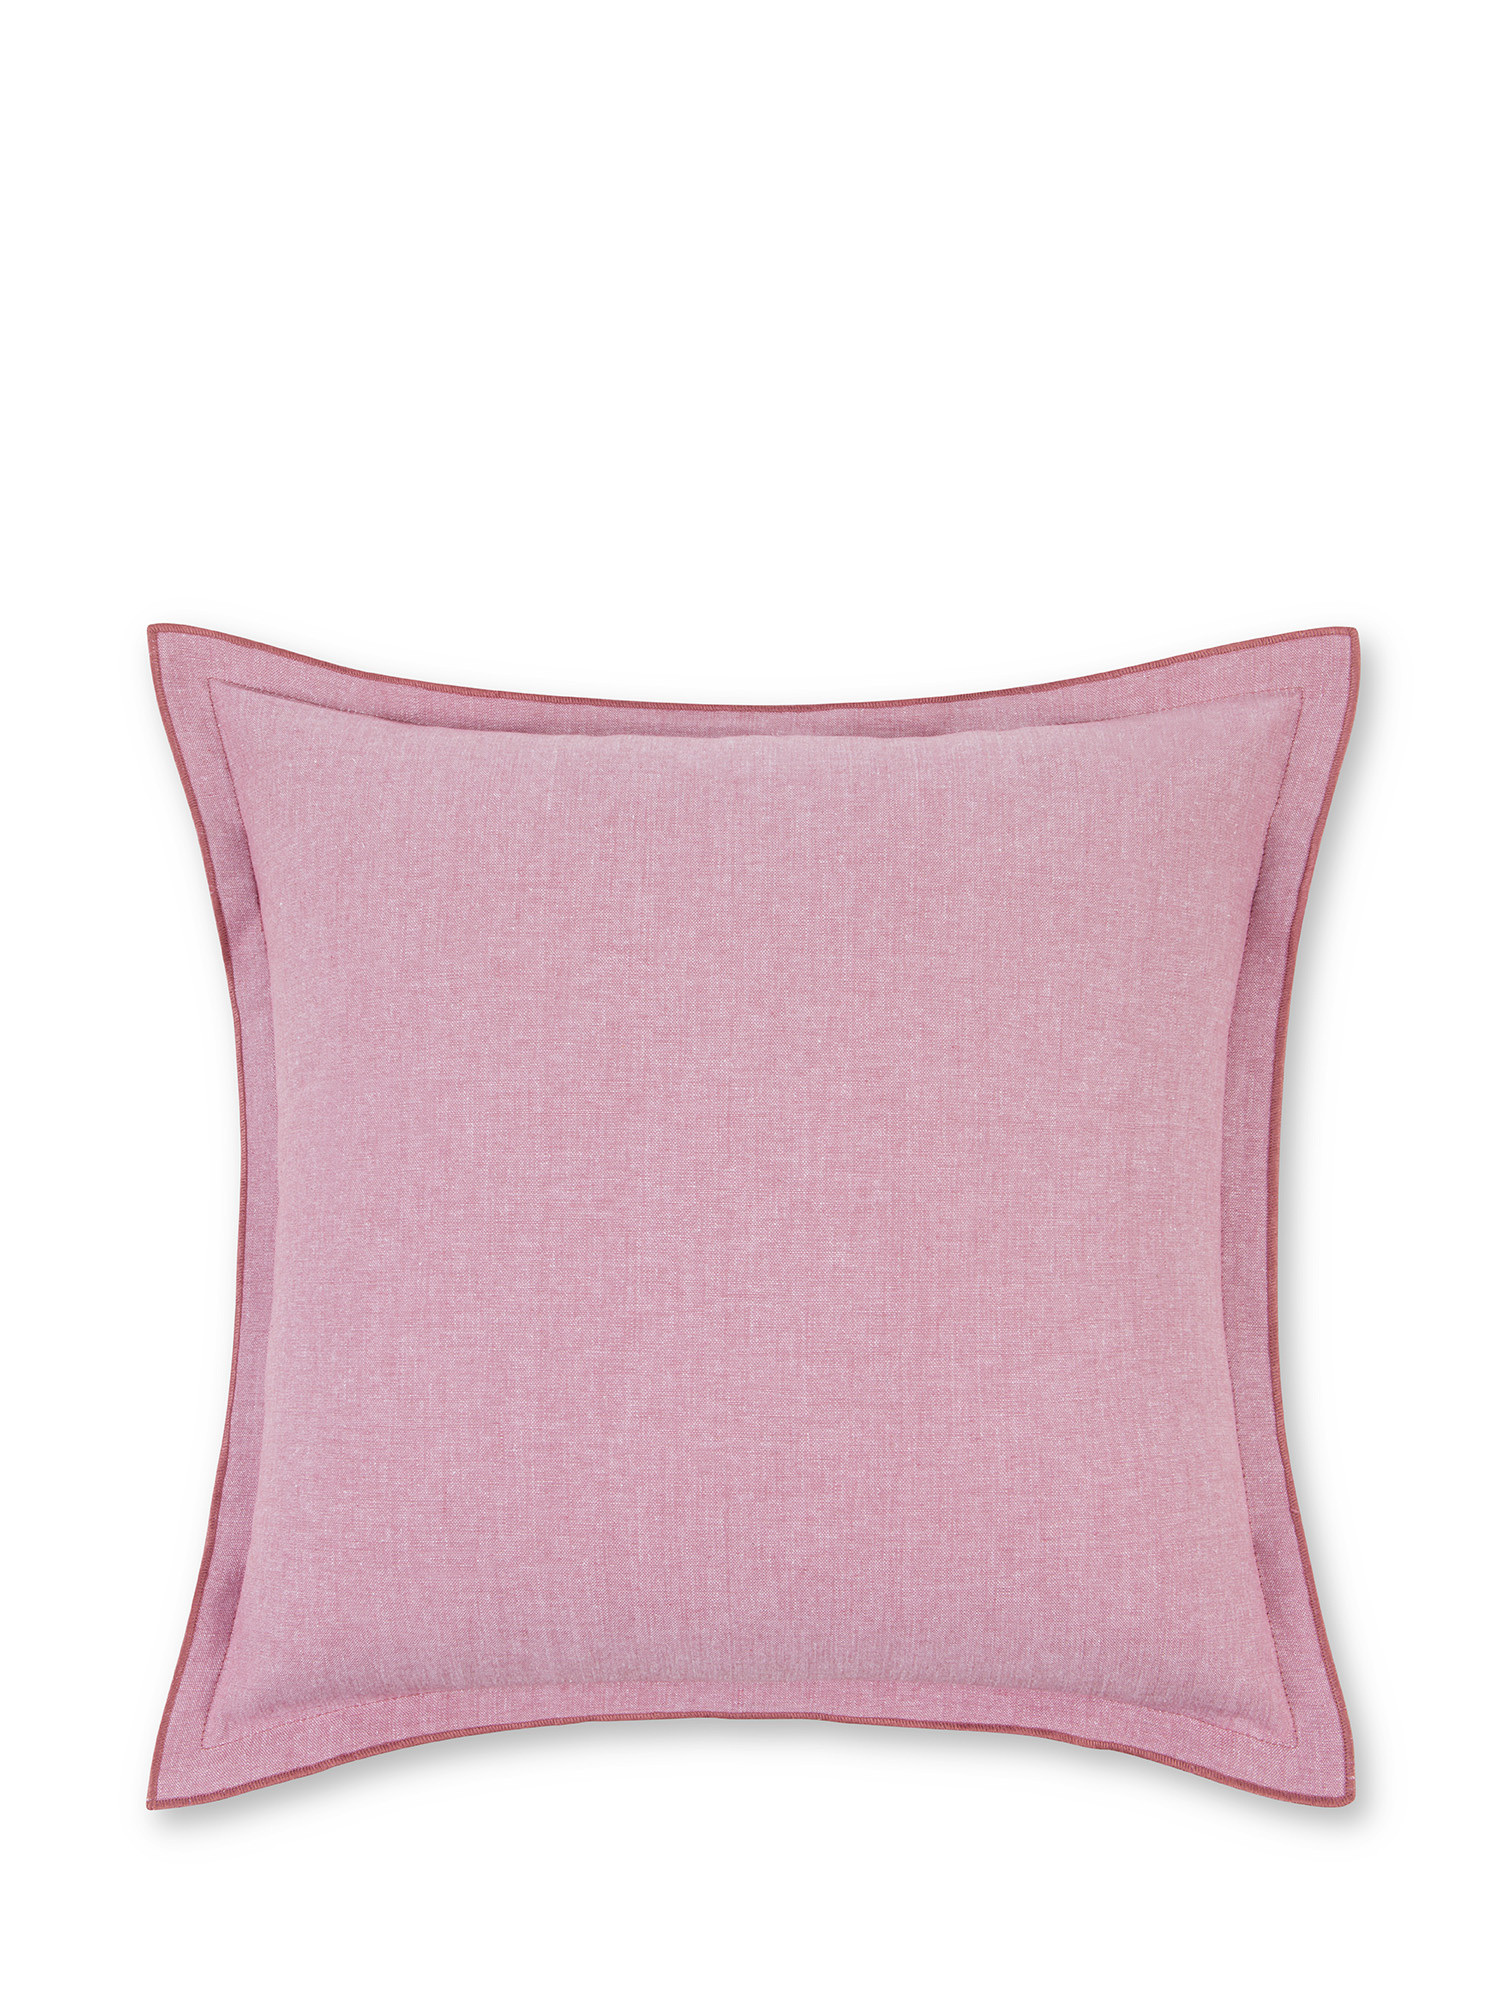 Cuscino cotone chambray 45x45cm, Rosa, large image number 0